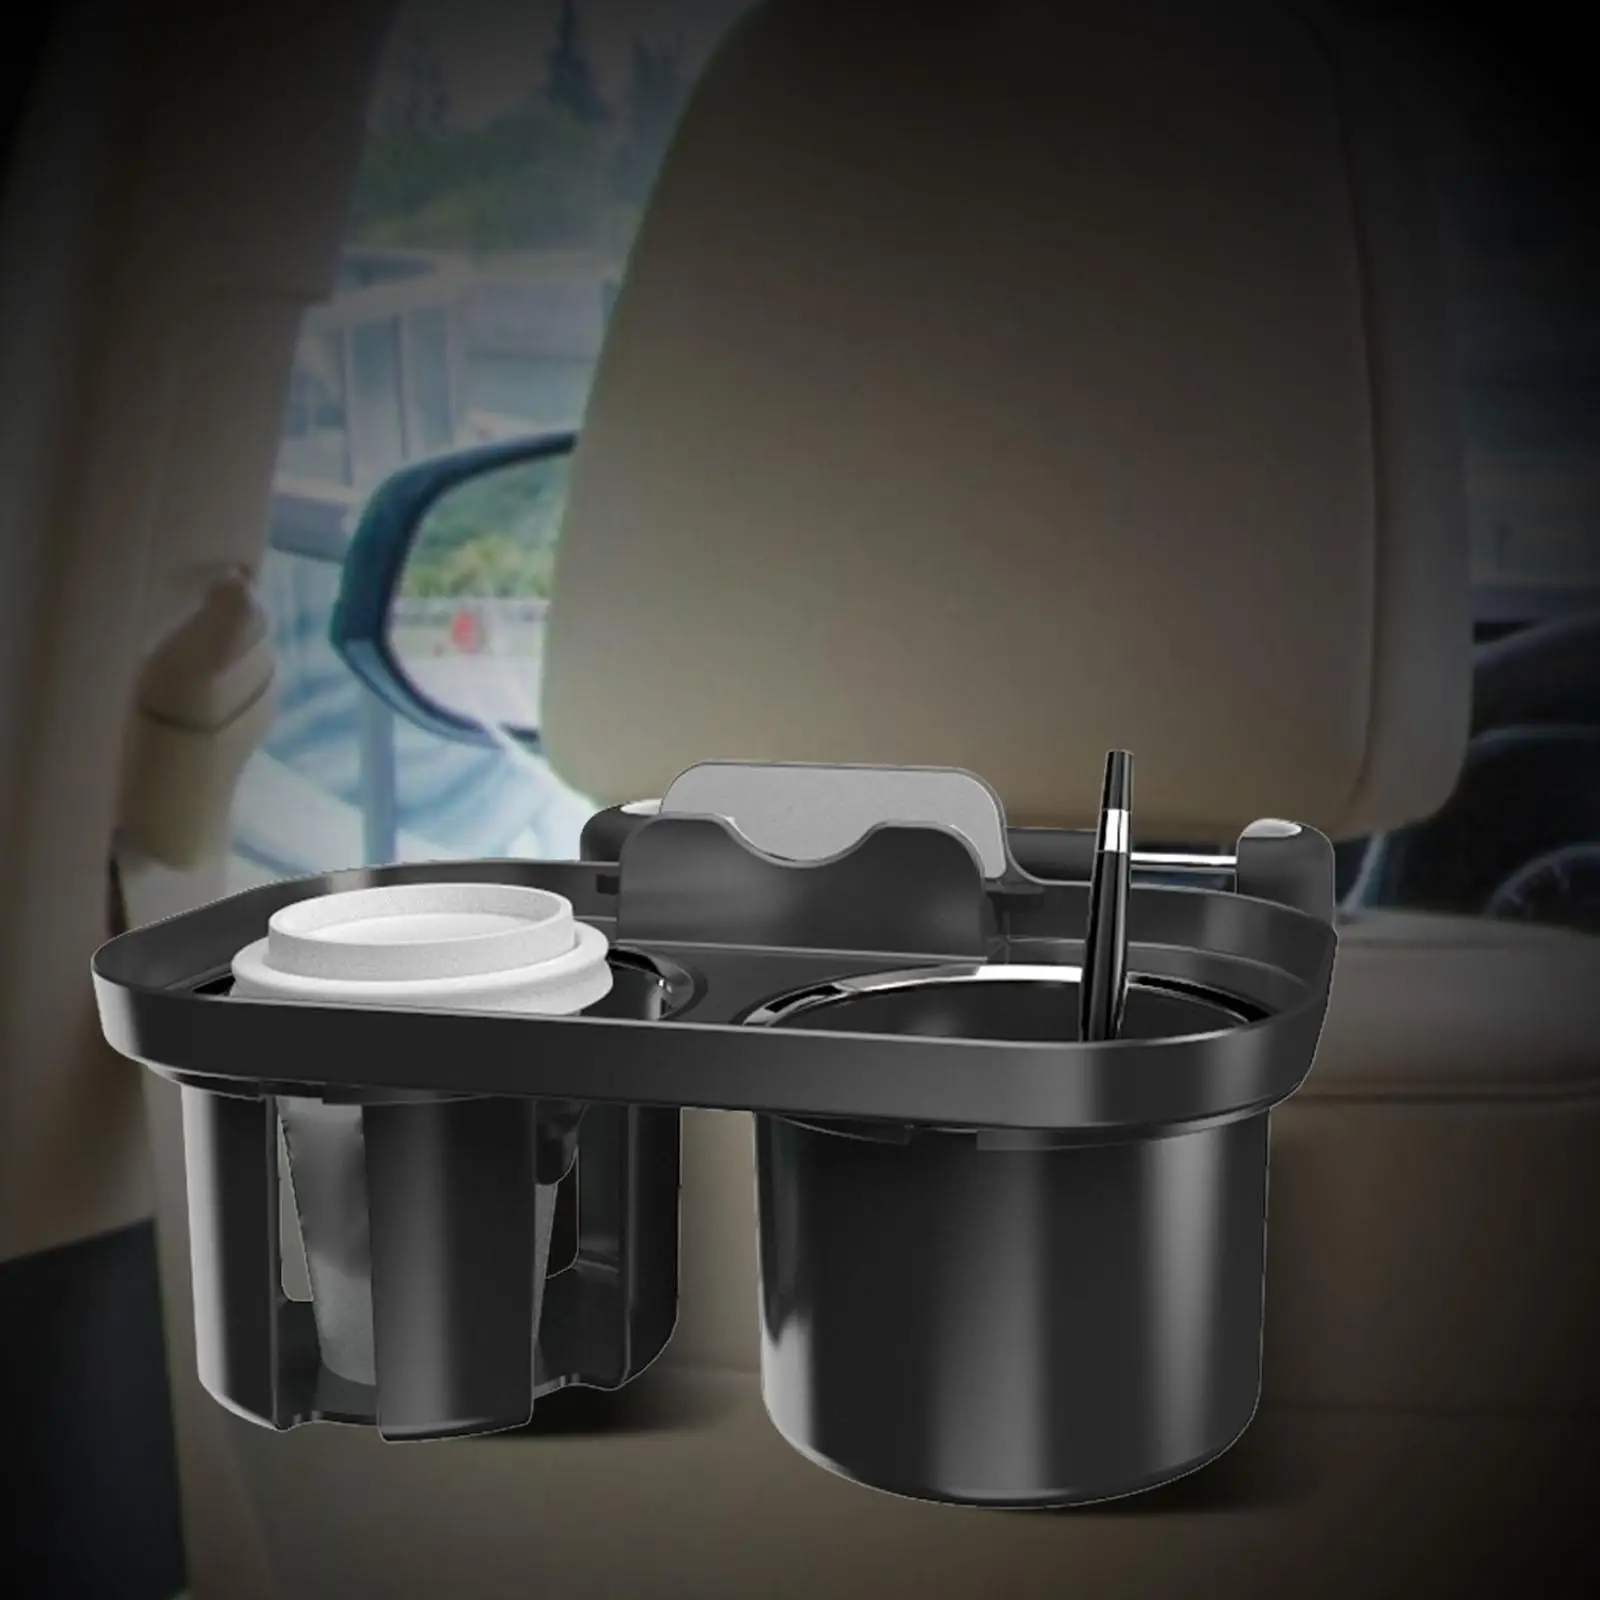  Headrest Cup Holder with Phone Mount Practical Snack Tray Drink